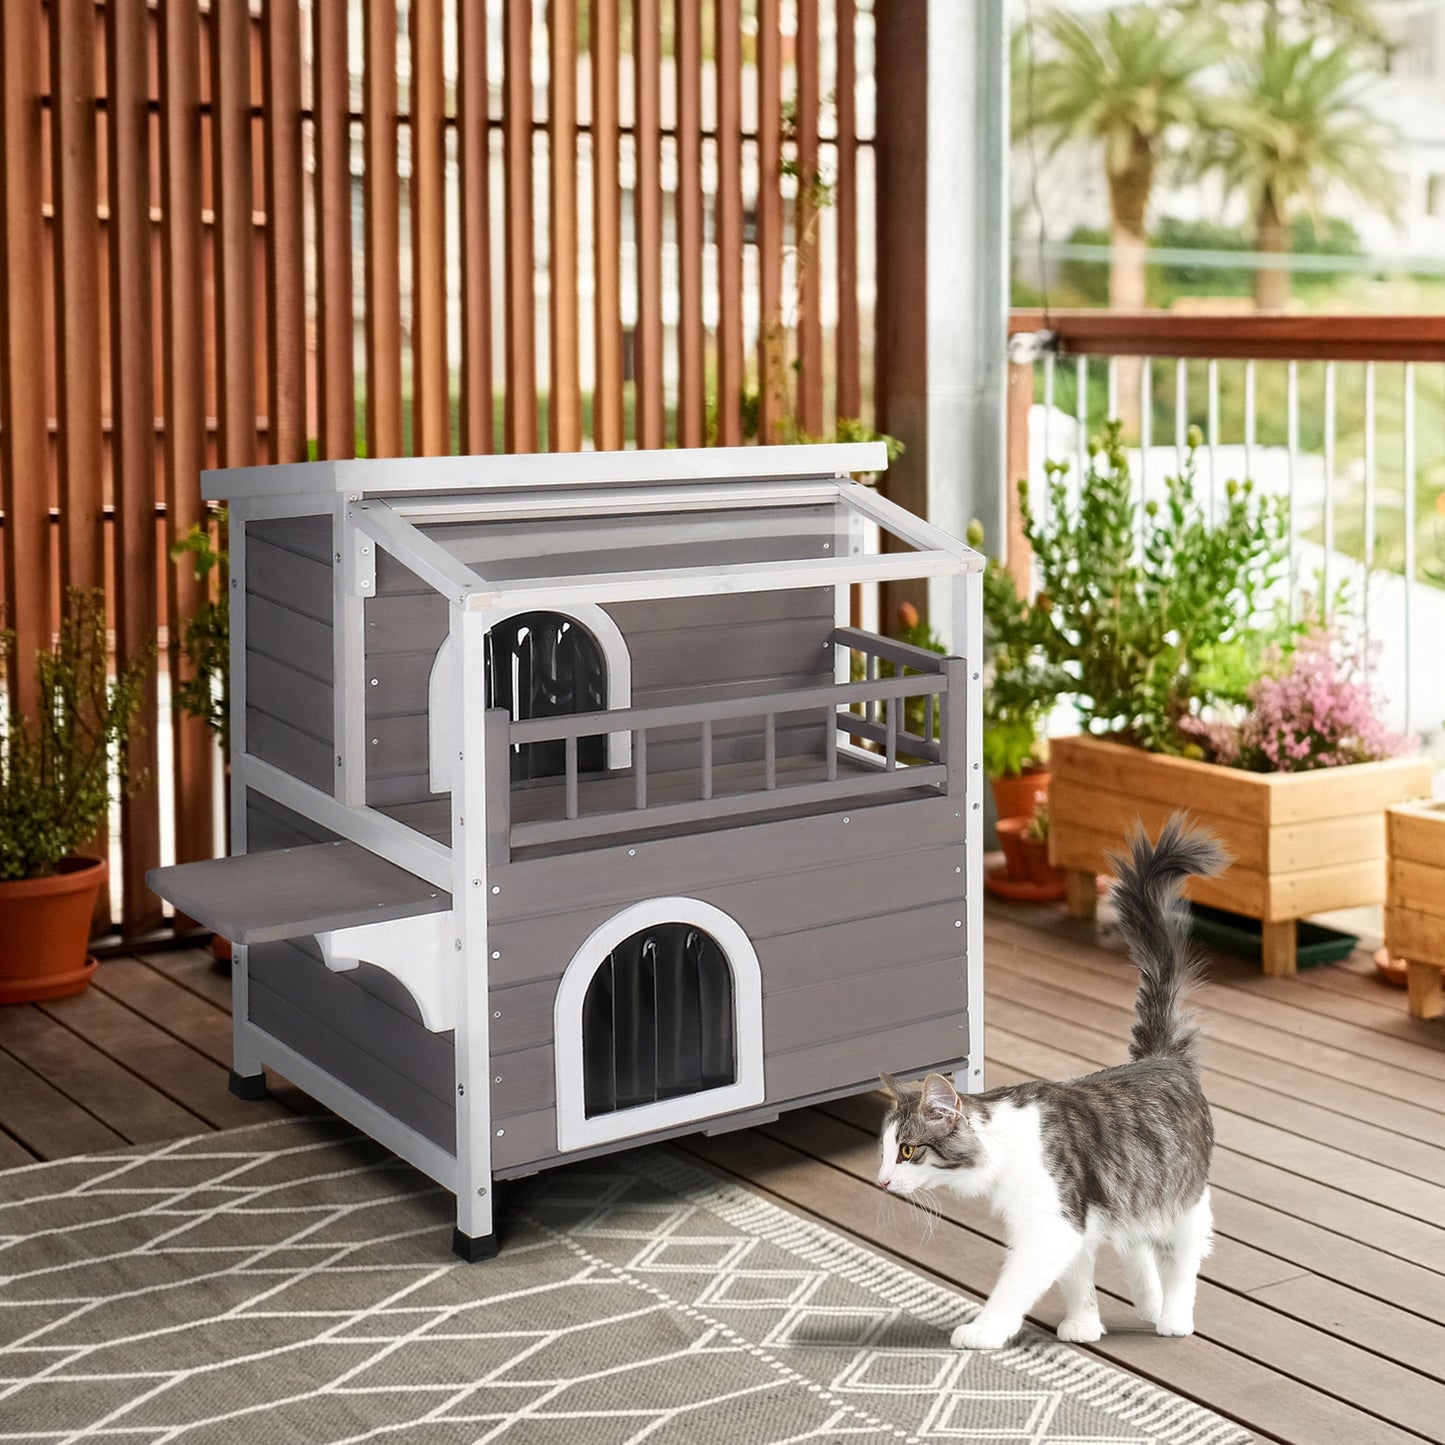 Wooden Cat house 2-Story Indoor Outdoor Luxurious Cat Shelter House with Transparent Canopy, Large Balcony, Openable Weatherproof Roof,Double escape door, Grey&White